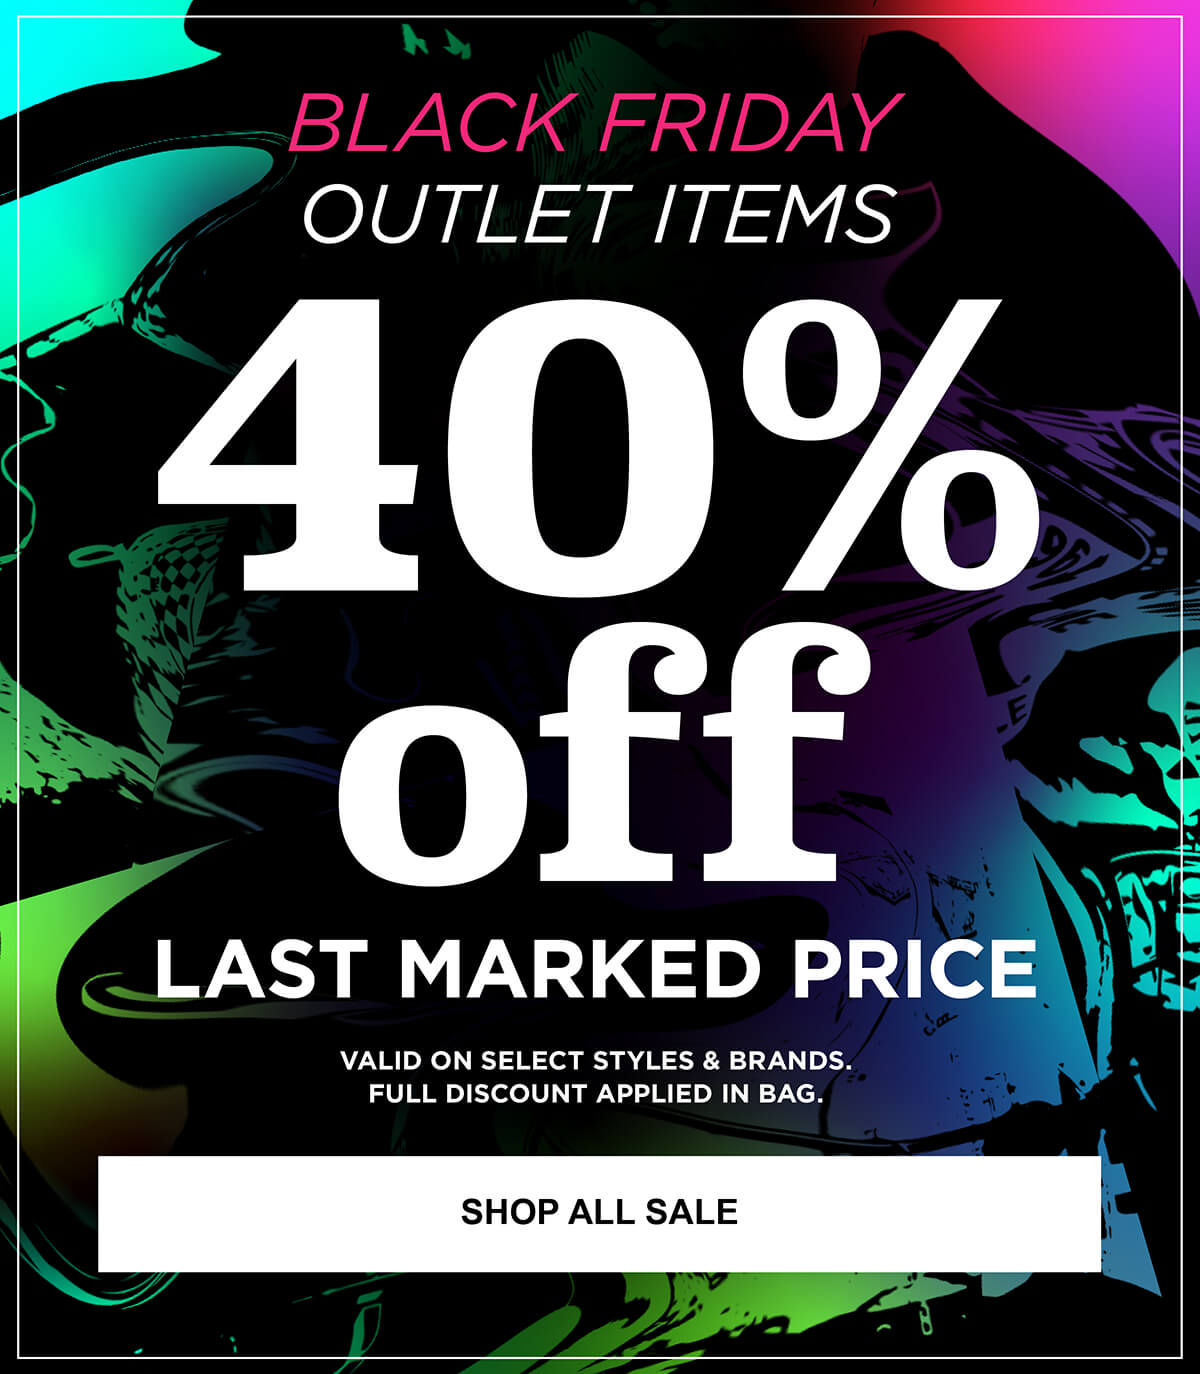 BLACK FRIDAY OUTLET SPECIAL - UP TO 40% OFF LAST MARKED PRICE